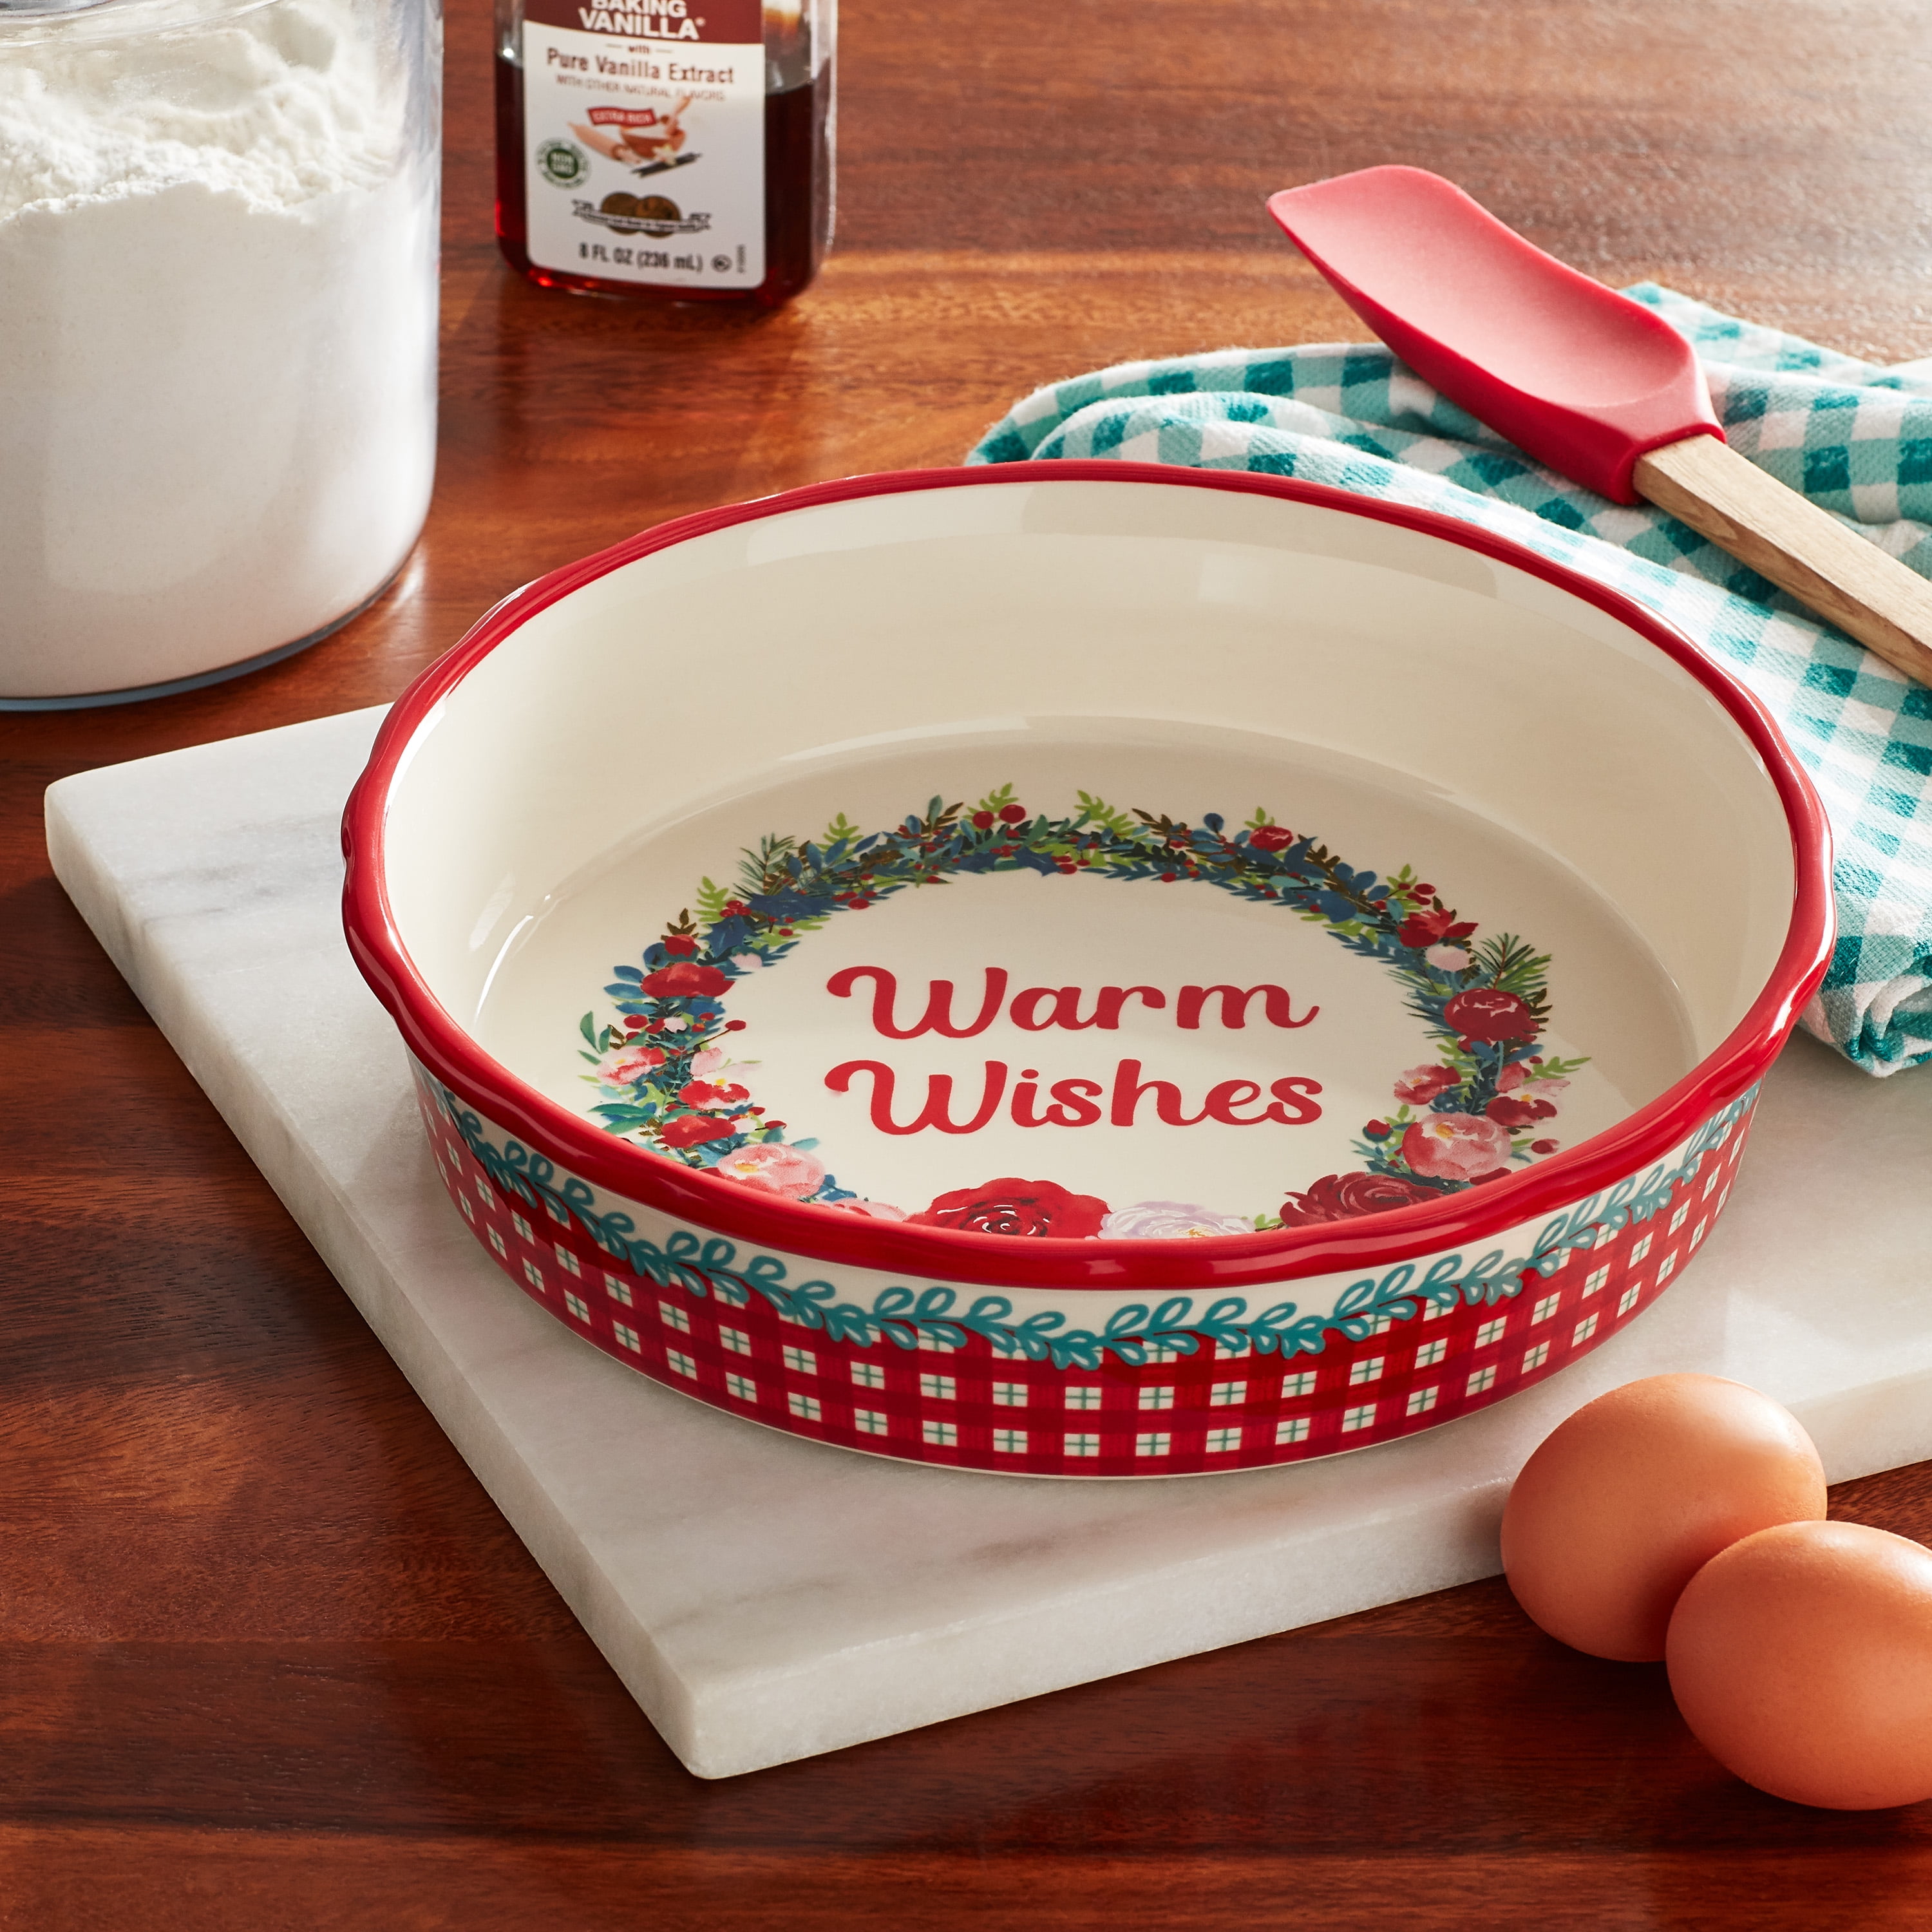  The Pioneer Woman Mazie Pie Dish-Stoneware 9.4 Inch Pie Pan For  Everyday and Holidays Baking: Home & Kitchen